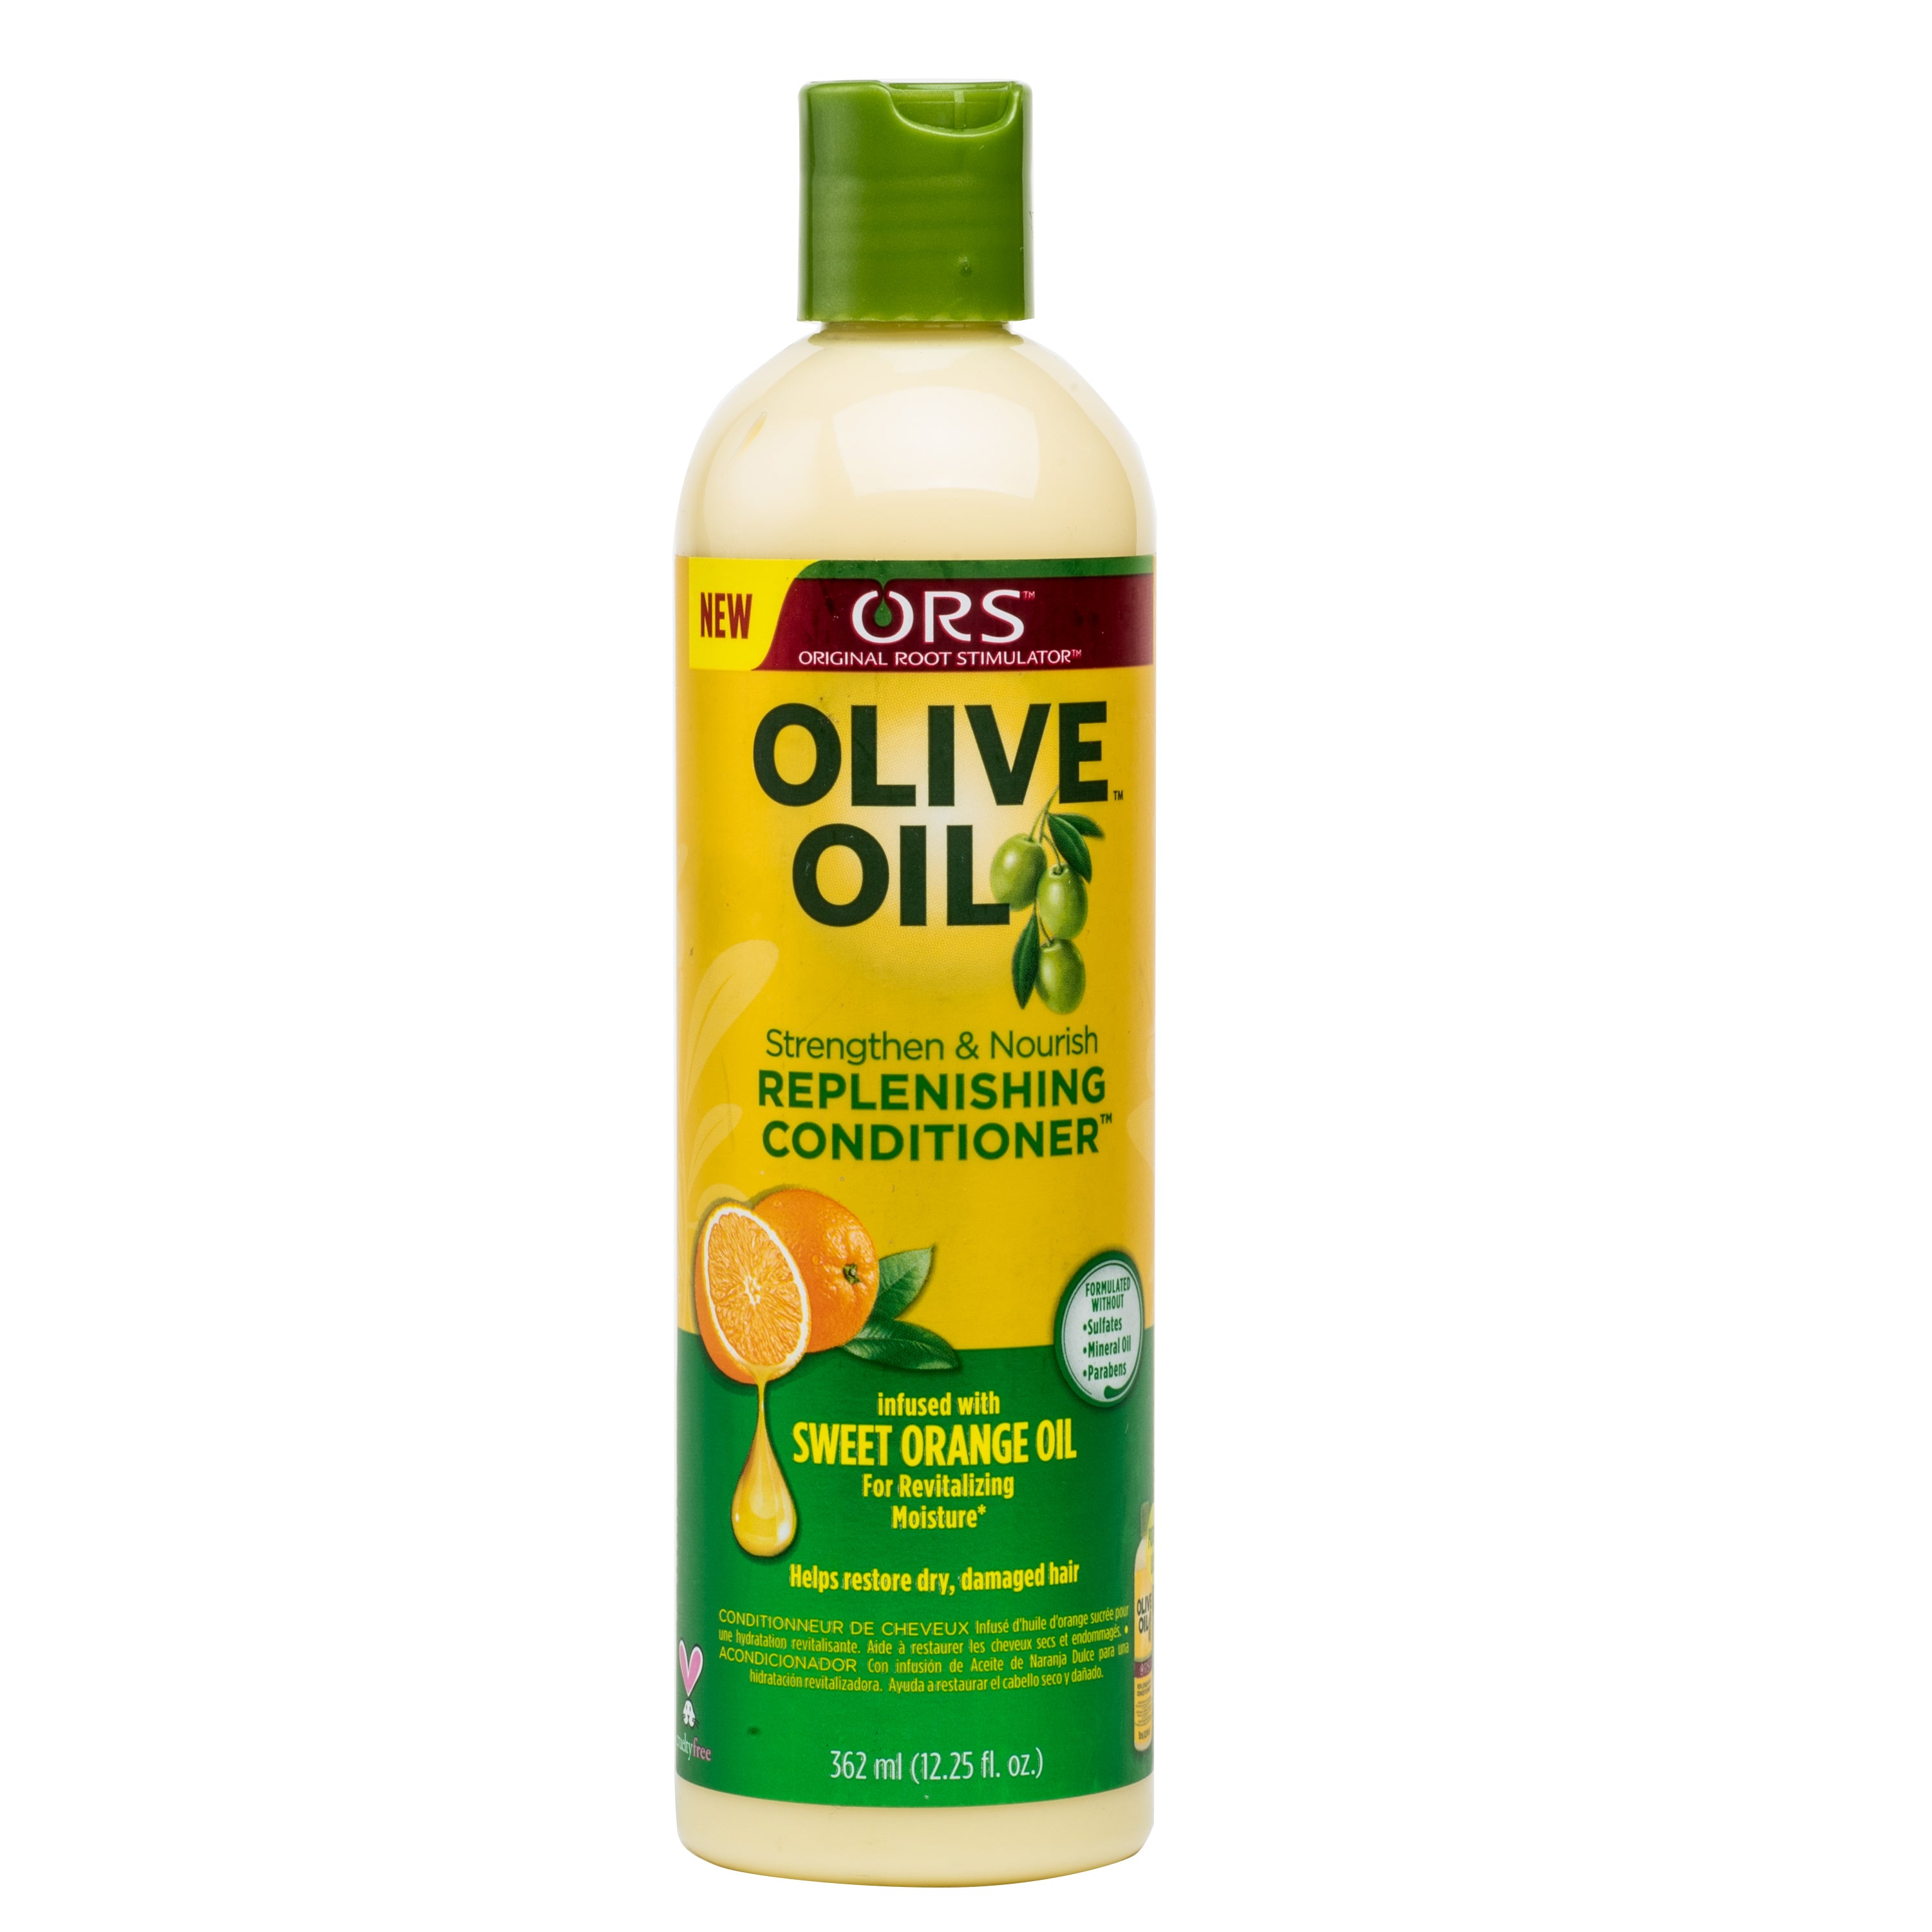 ORS Olive OIl Strength and Nourish Replenishing Conditioner 12.25oz